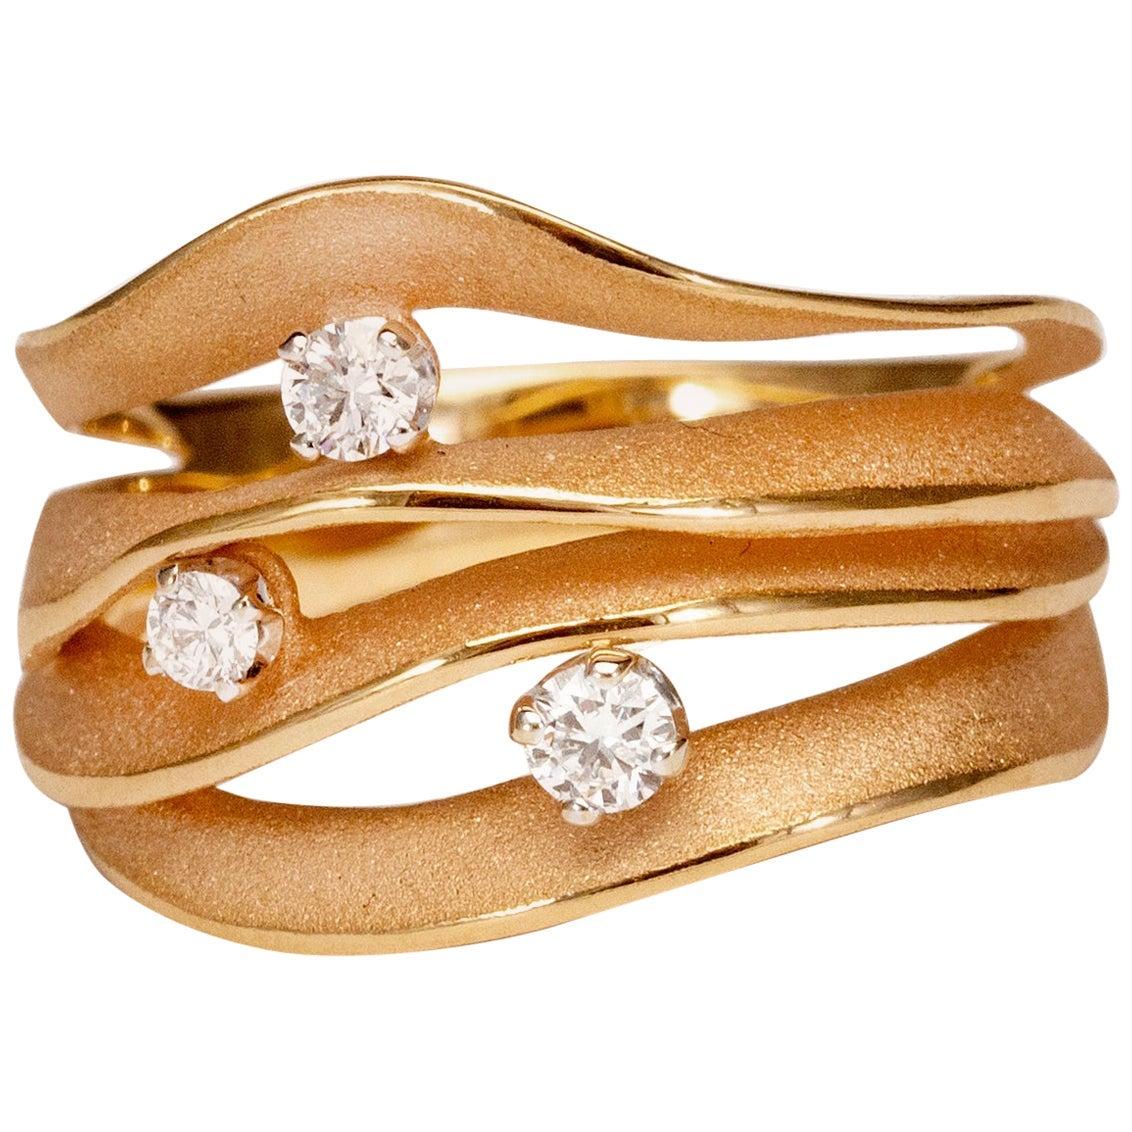 For Sale:  Annamaria Cammilli "Dune Royal" Ring with Diamonds in 18k Orange Apricot Gold